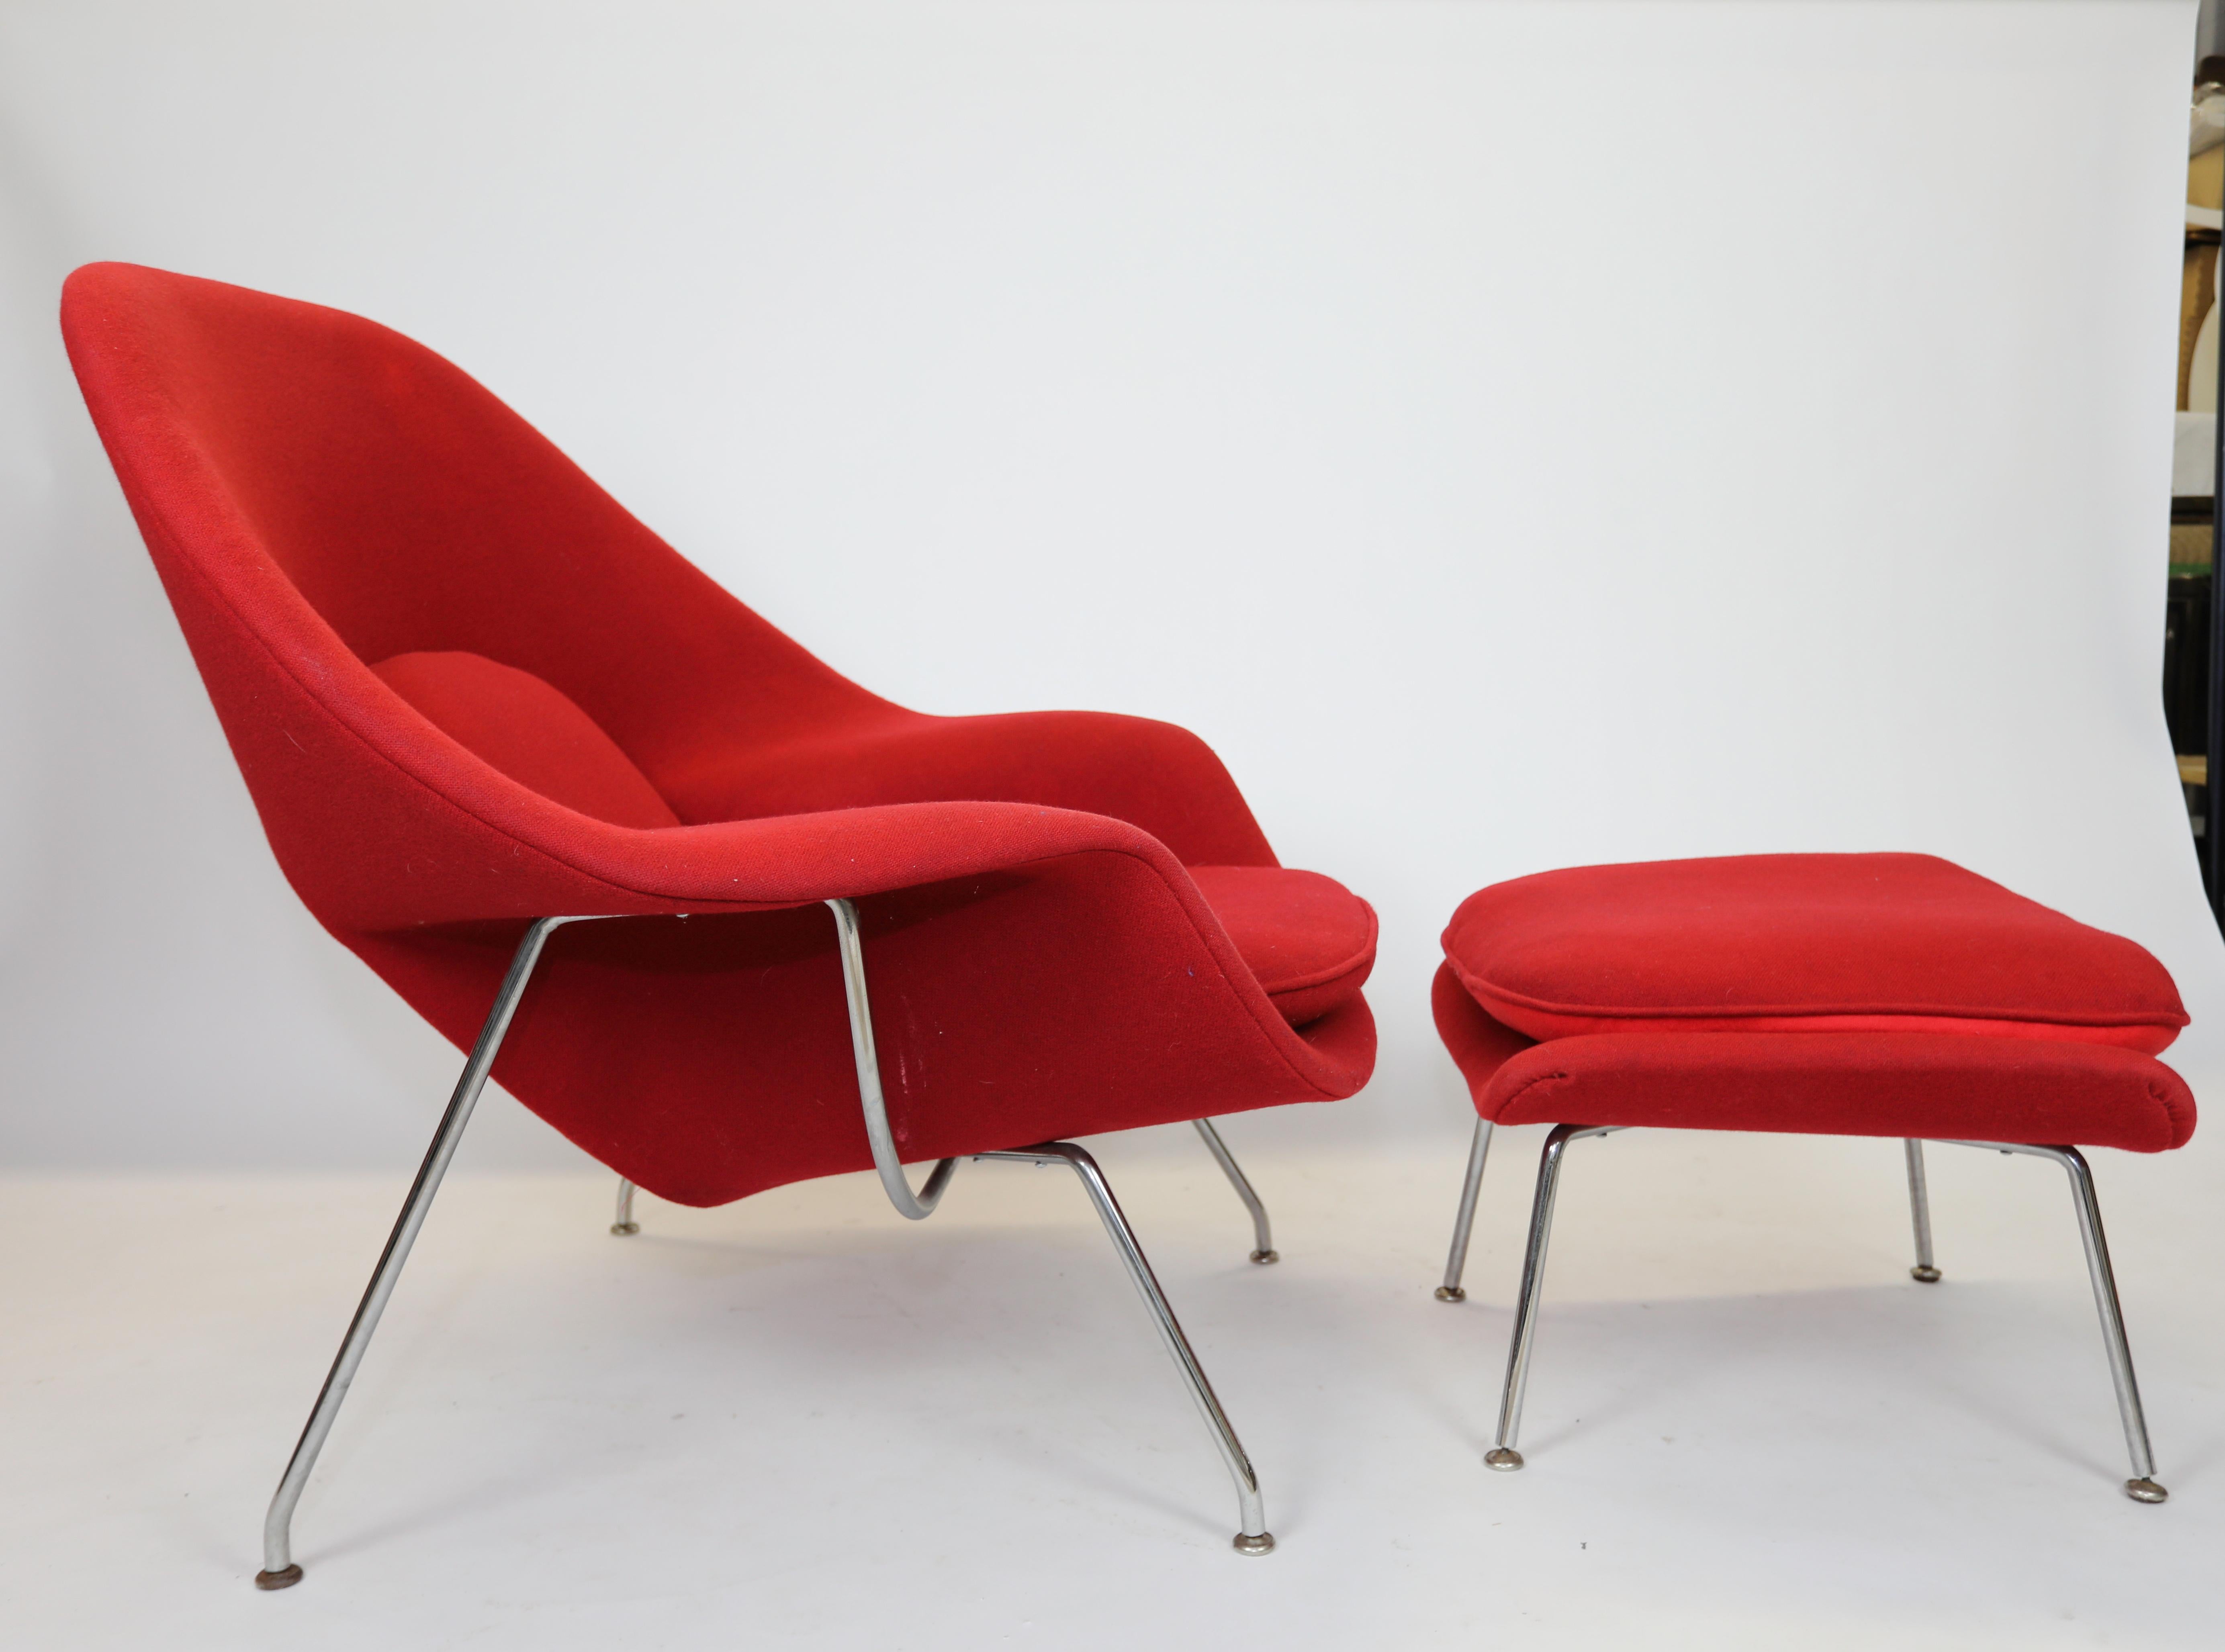 An original Womb Chair and Ottoman
Manufactured by Knoll C.1975
Original Upholstery
Labeled
ottoman- 24